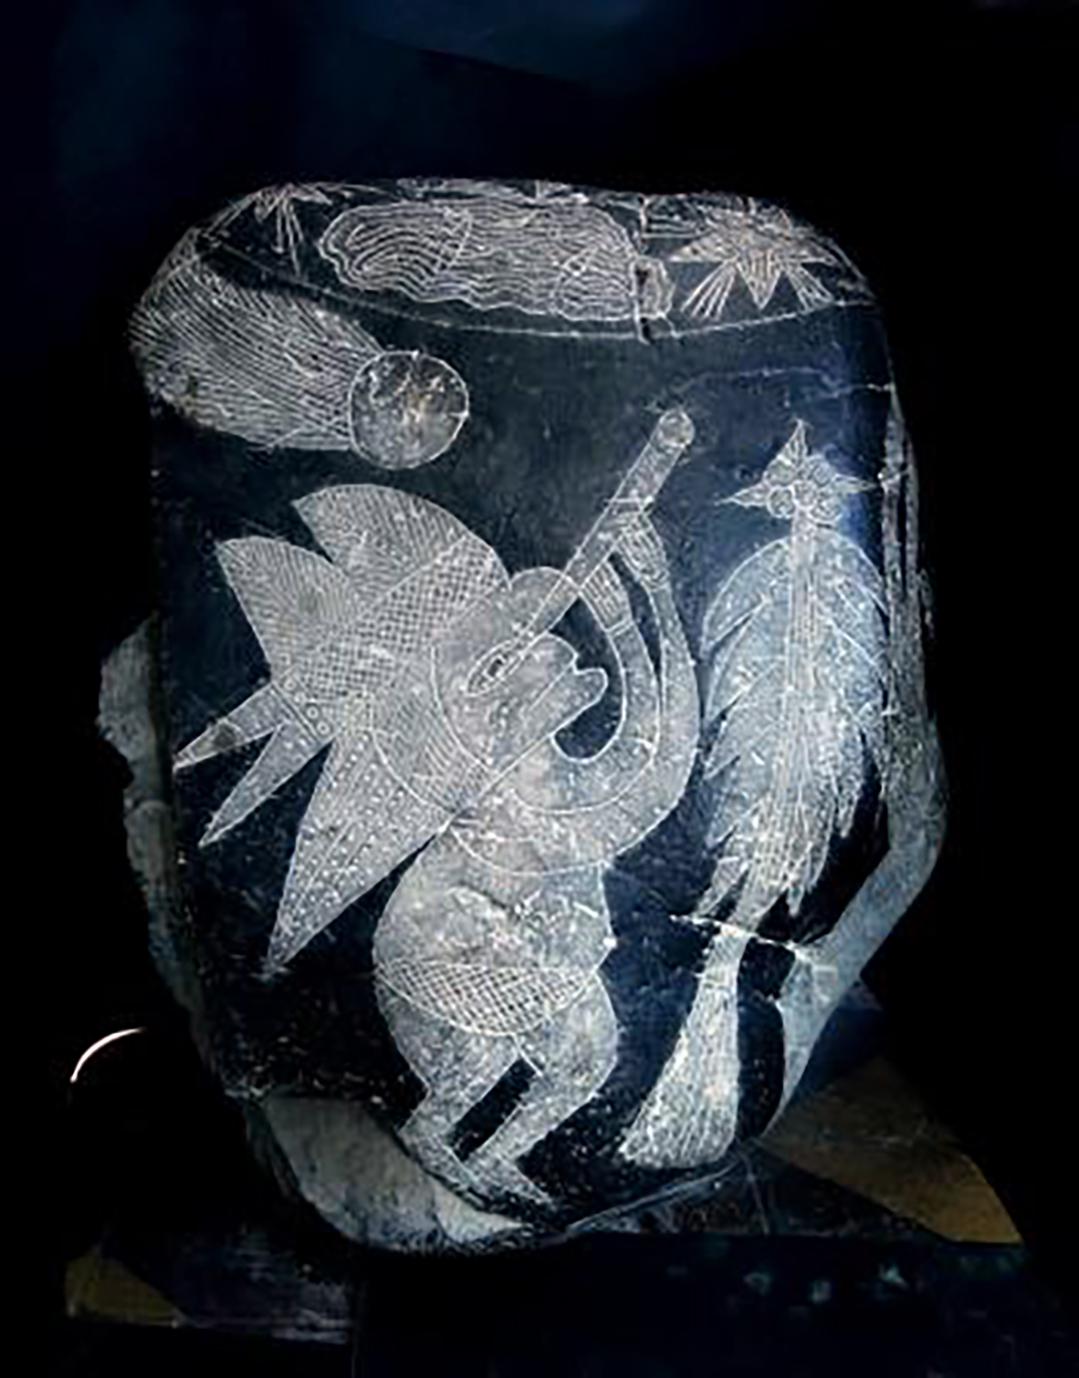 This Ica Stone depicts a person wearing a headdress, observing a comet through a telescope. (Courtesy of Eugenia Cabrera)